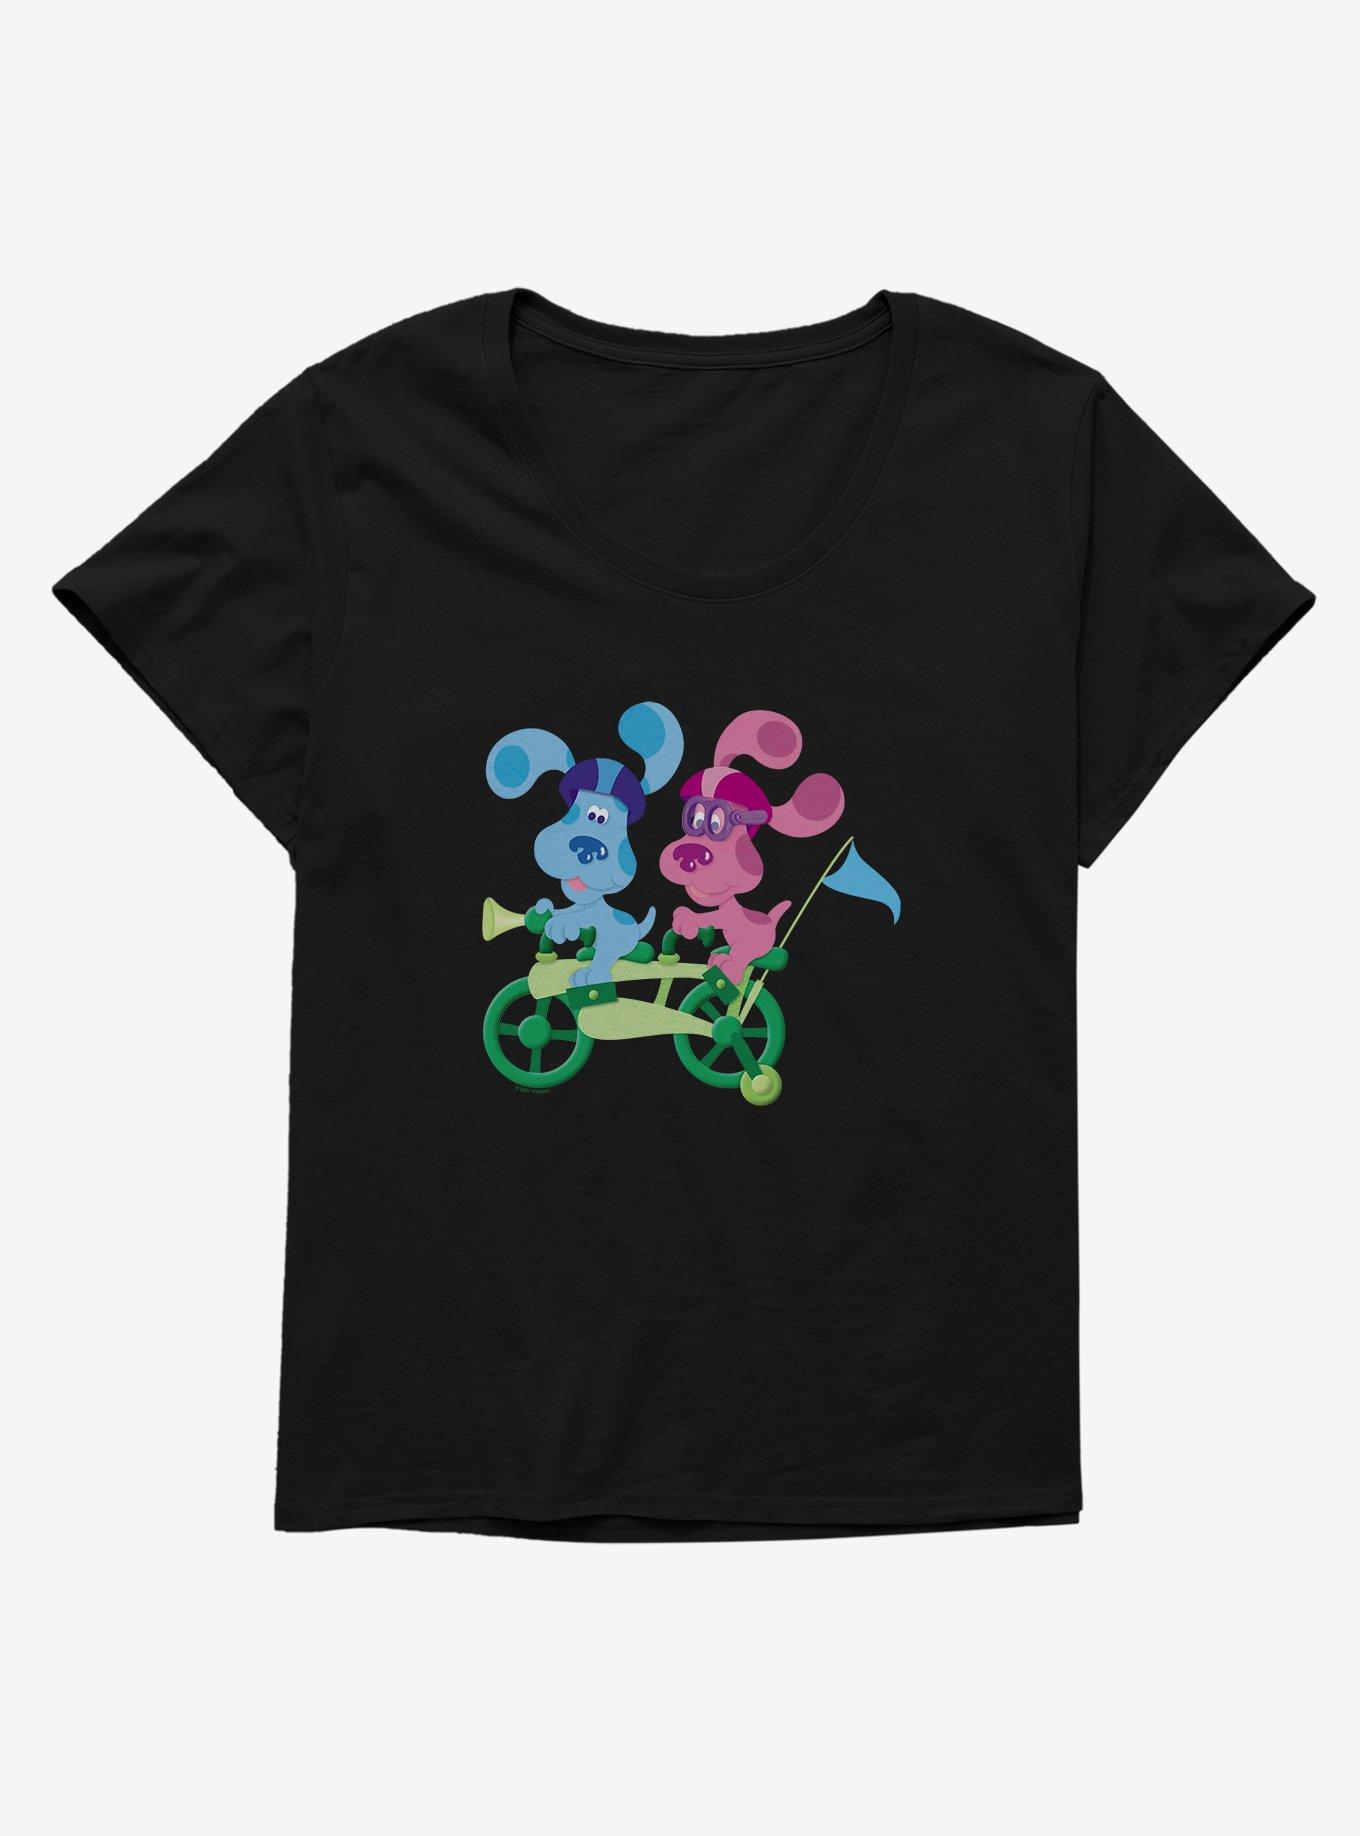 Blue's Clues Blue and Magenta Girls T-Shirt Plus